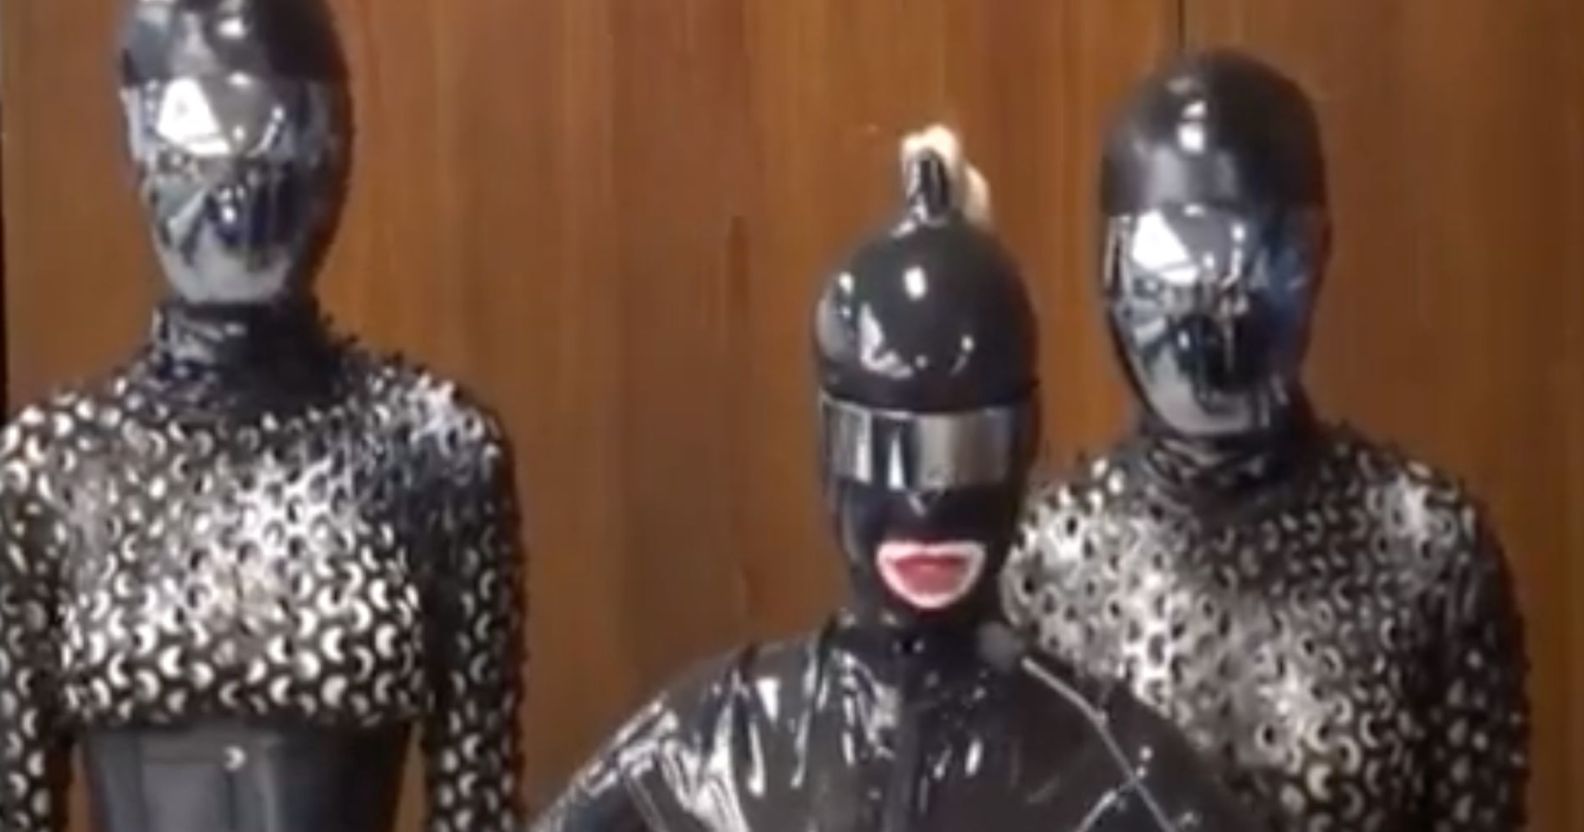 A screengrab from Twitter shows three people dressed in black latex, head-to-toe body suits standing in front of a wall